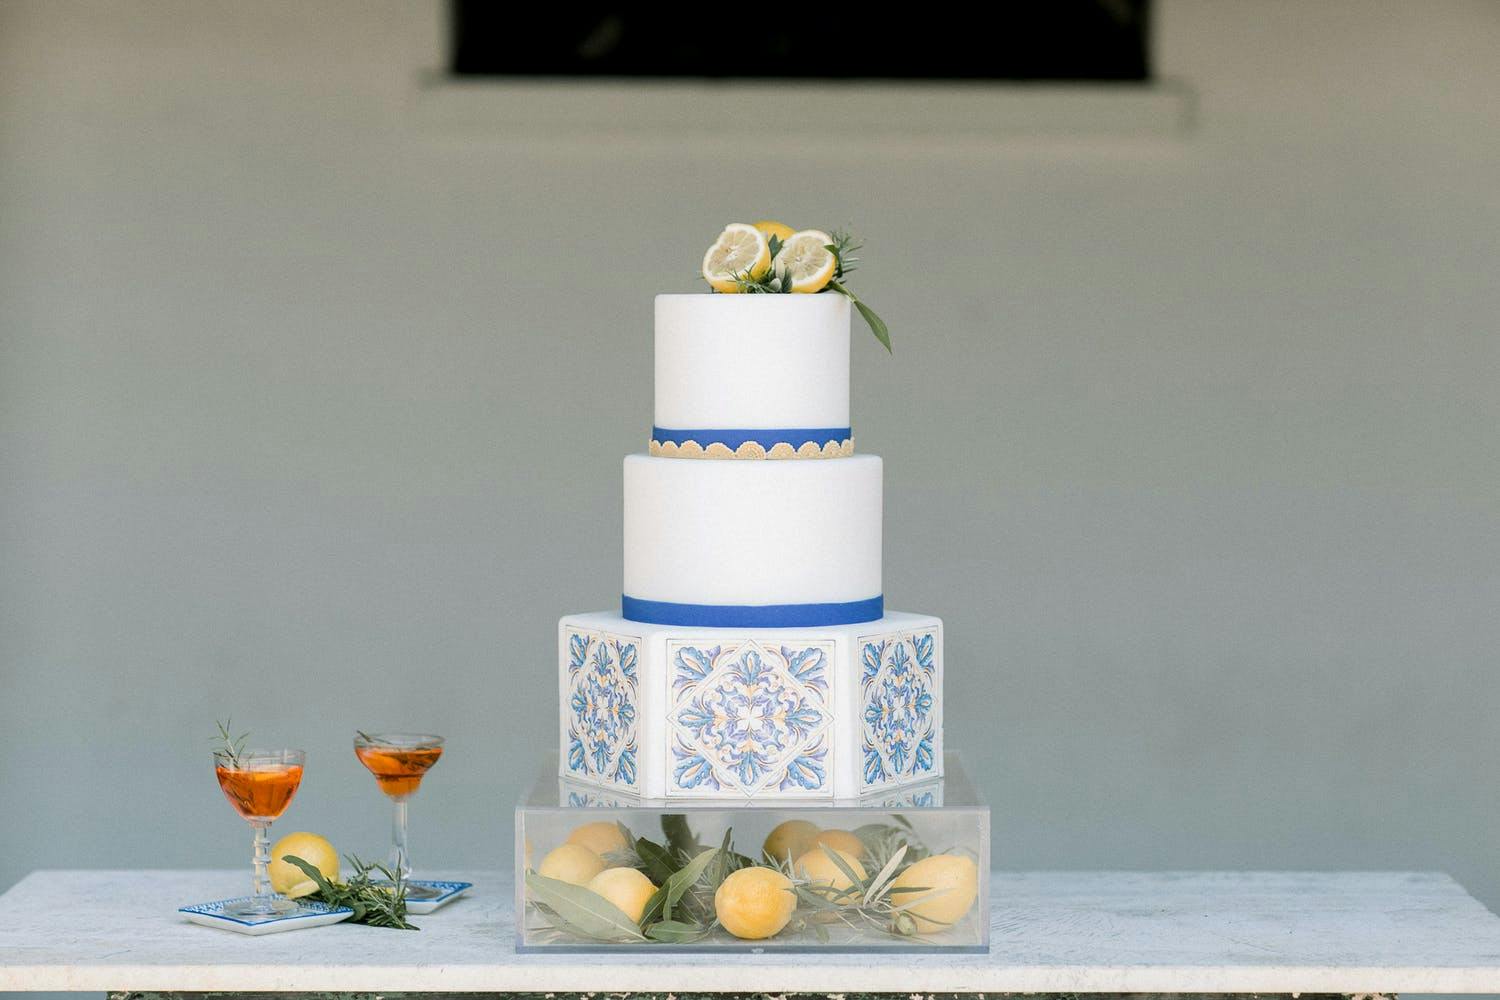 Three-tier wedding cake with a hexagon bottom tier and blue and white design on a lucite cake stand filled with lemons | PartySlate